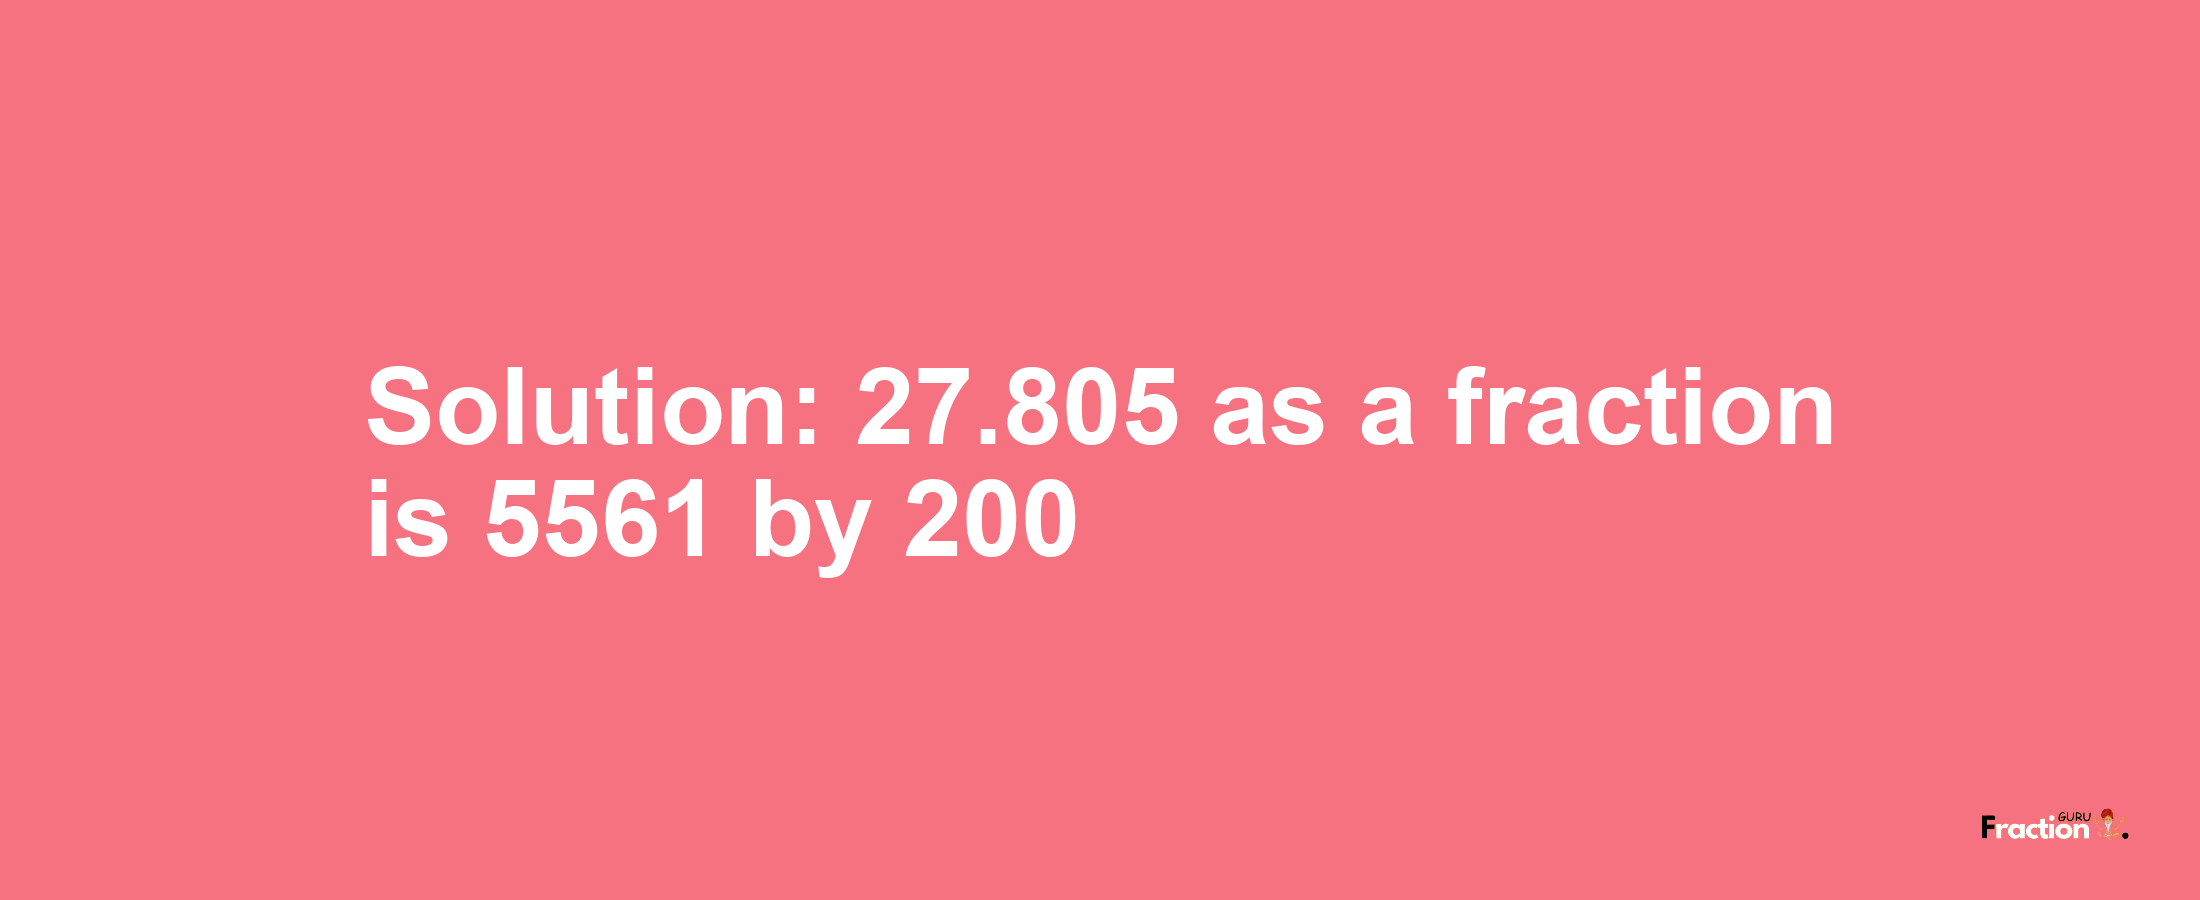 Solution:27.805 as a fraction is 5561/200